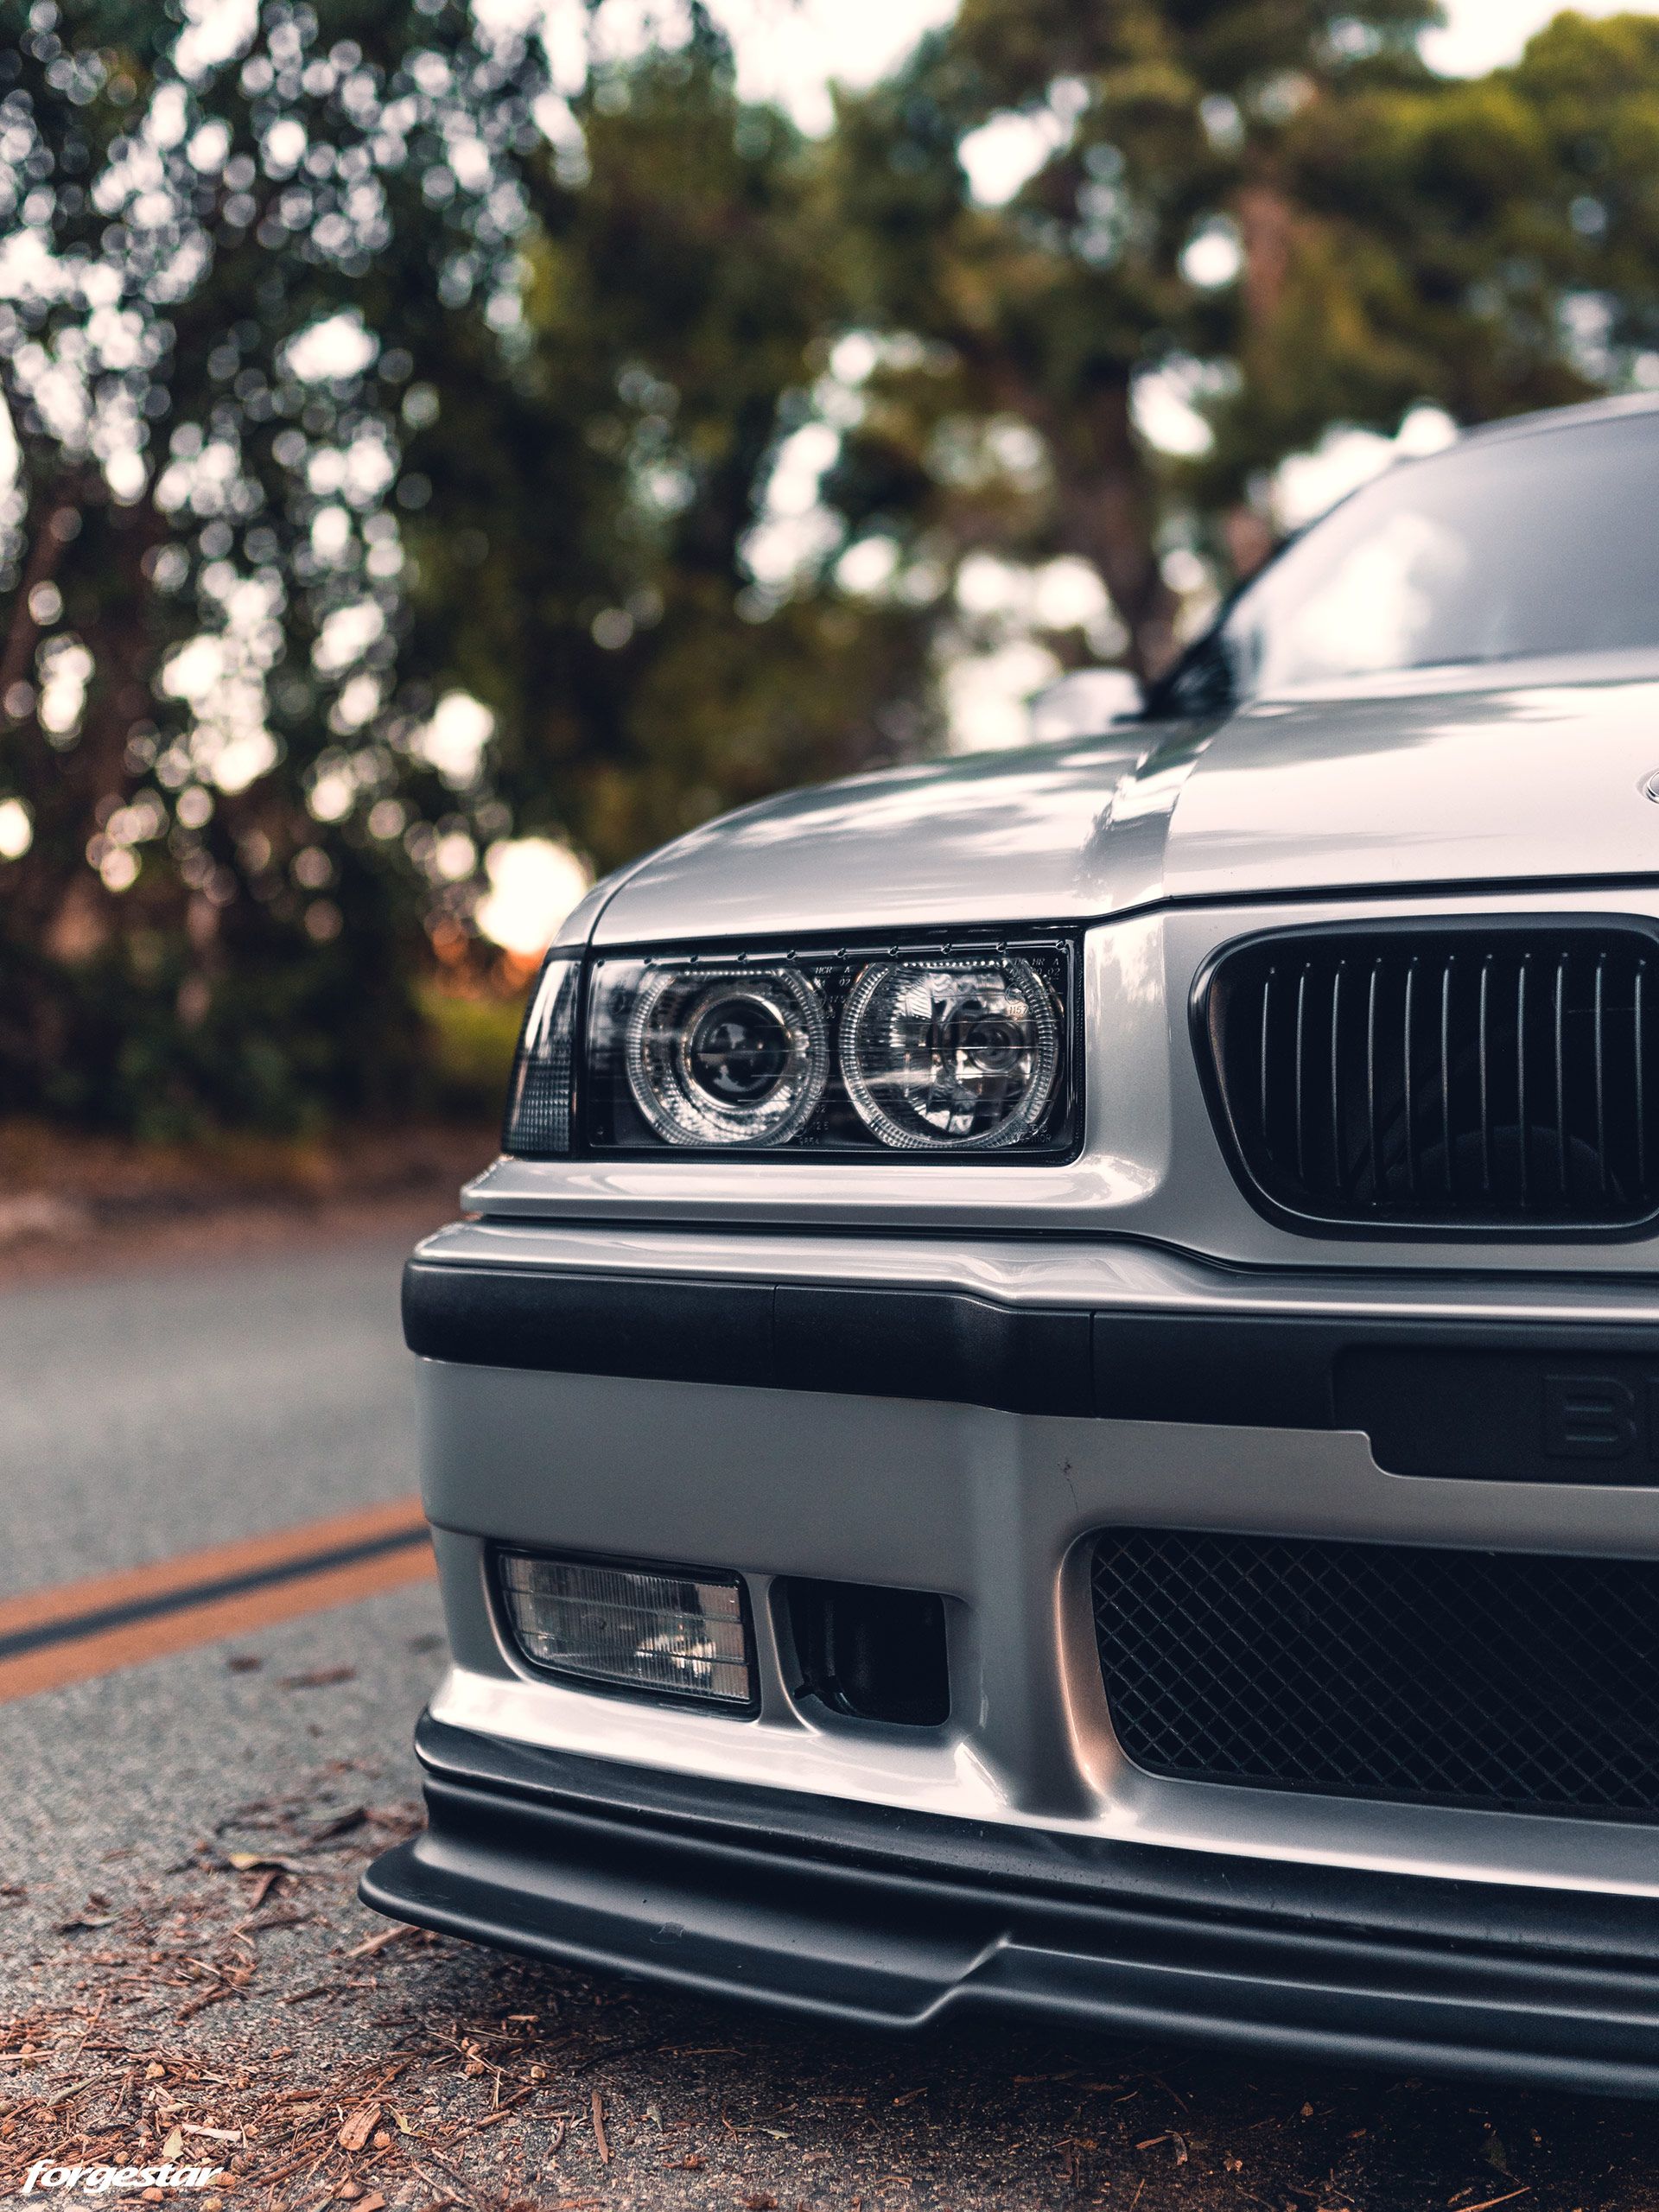 Artic Silver BMW E36 M3 With Aftermarket Mods and Wheels. Bmw, Bmw e Dream cars bmw